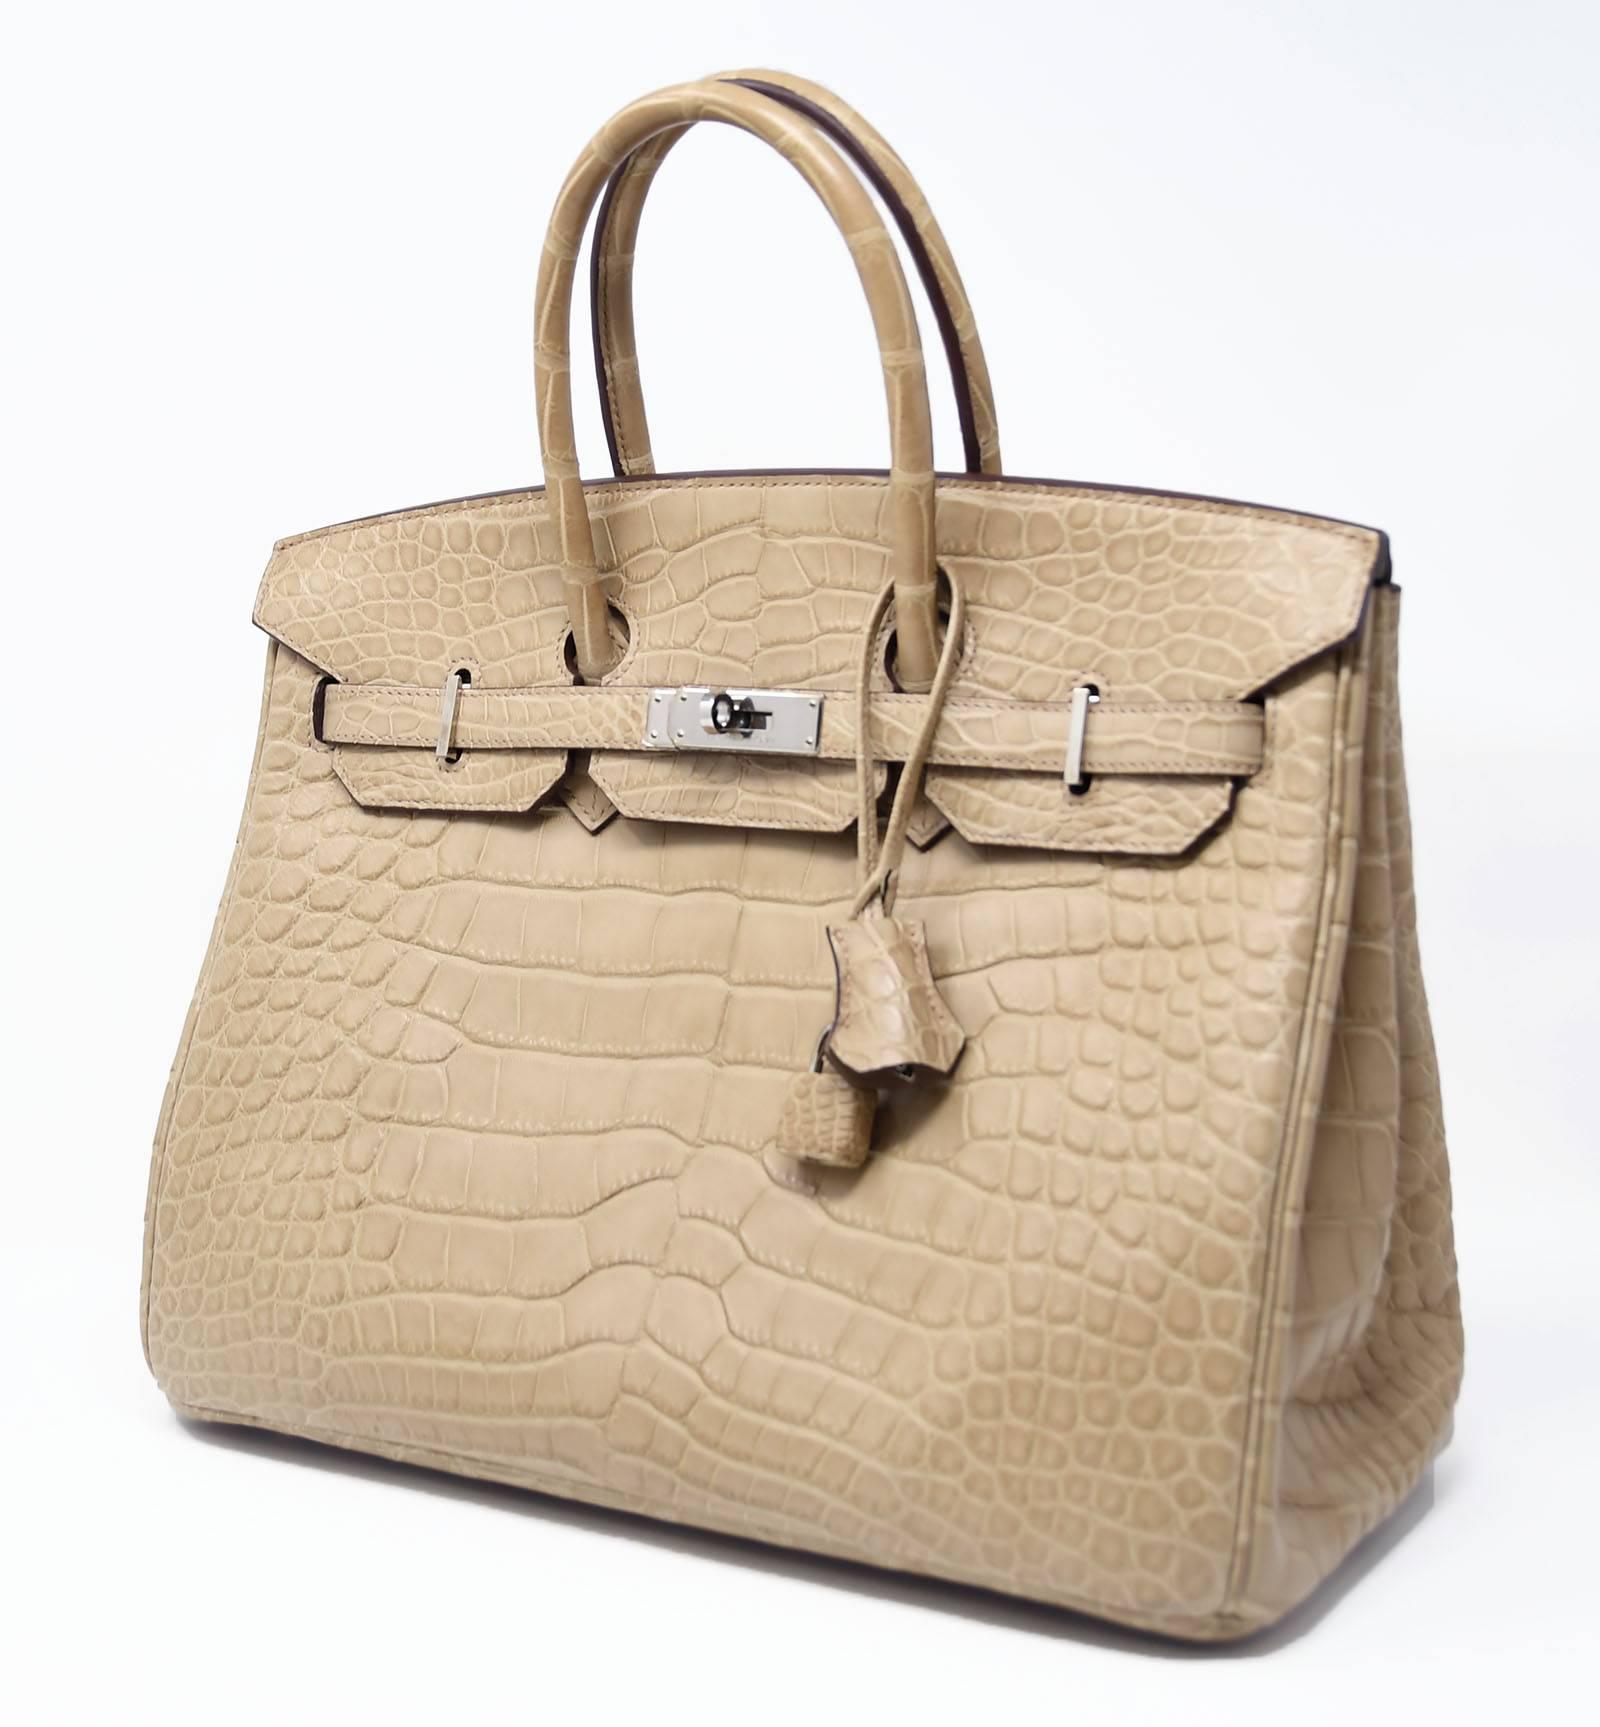 Extremely rare Hermes Birkin in Natural Matte Alligator with Palladium hardware. New with Plastic on hardware. Fabulous all year round. Includes the original Hermes box with sleepers, raincoat, lock keys and clochette.  Crafted in matte Poussiere